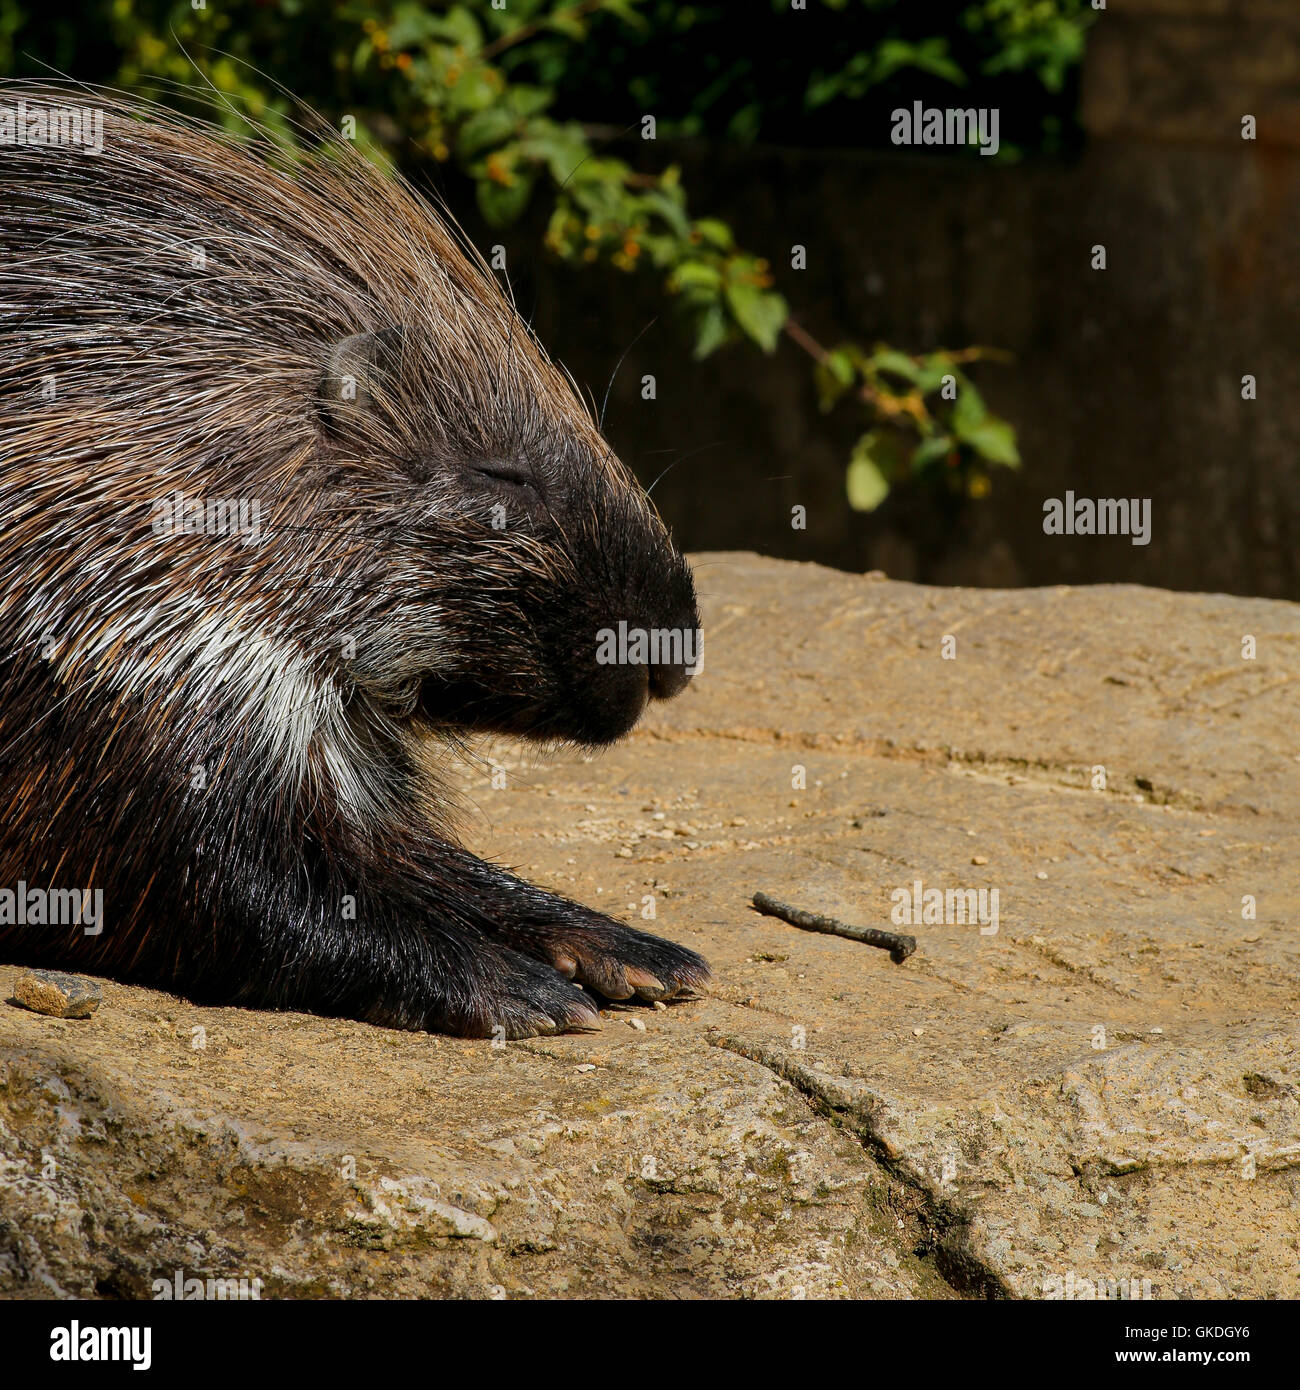 African crested porcupine Hystrix cristata displaying spines, resting on the rock Stock Photo